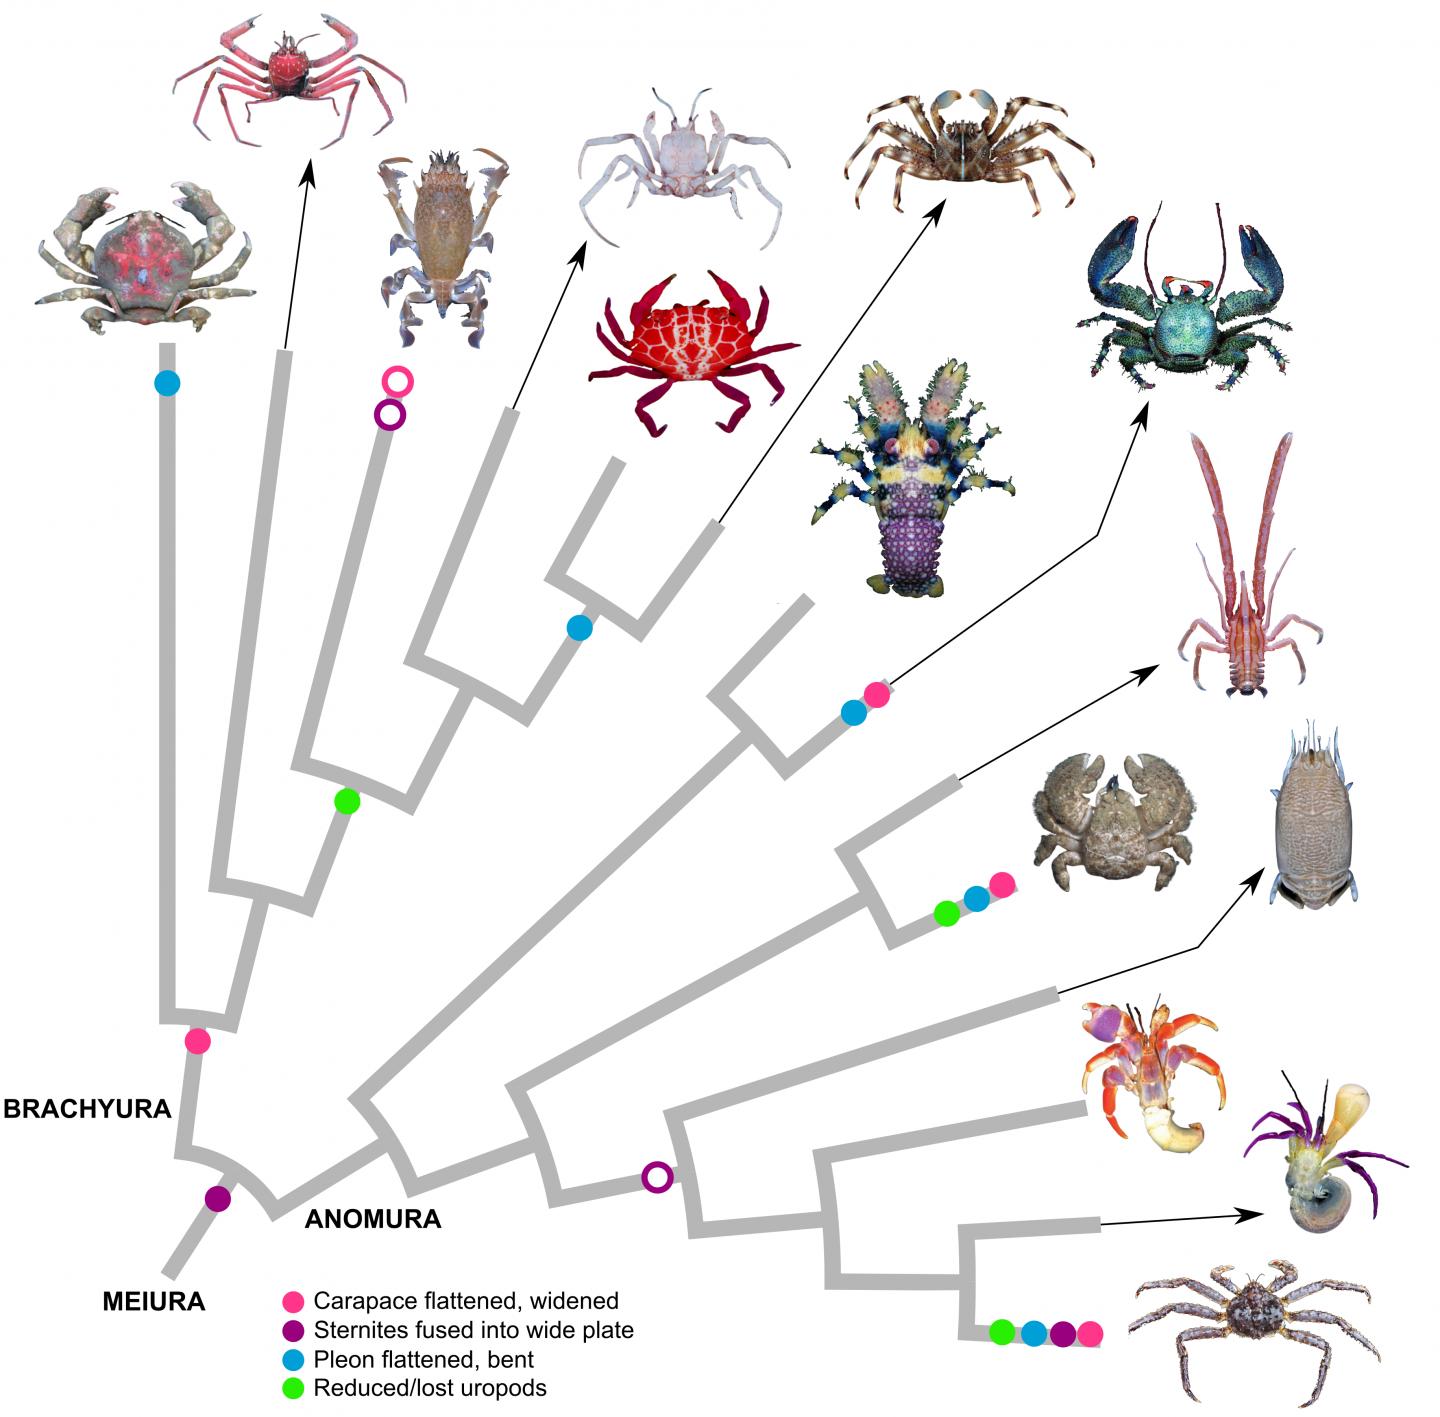 An evolutionary tree with branches showing where different crustaceans split off